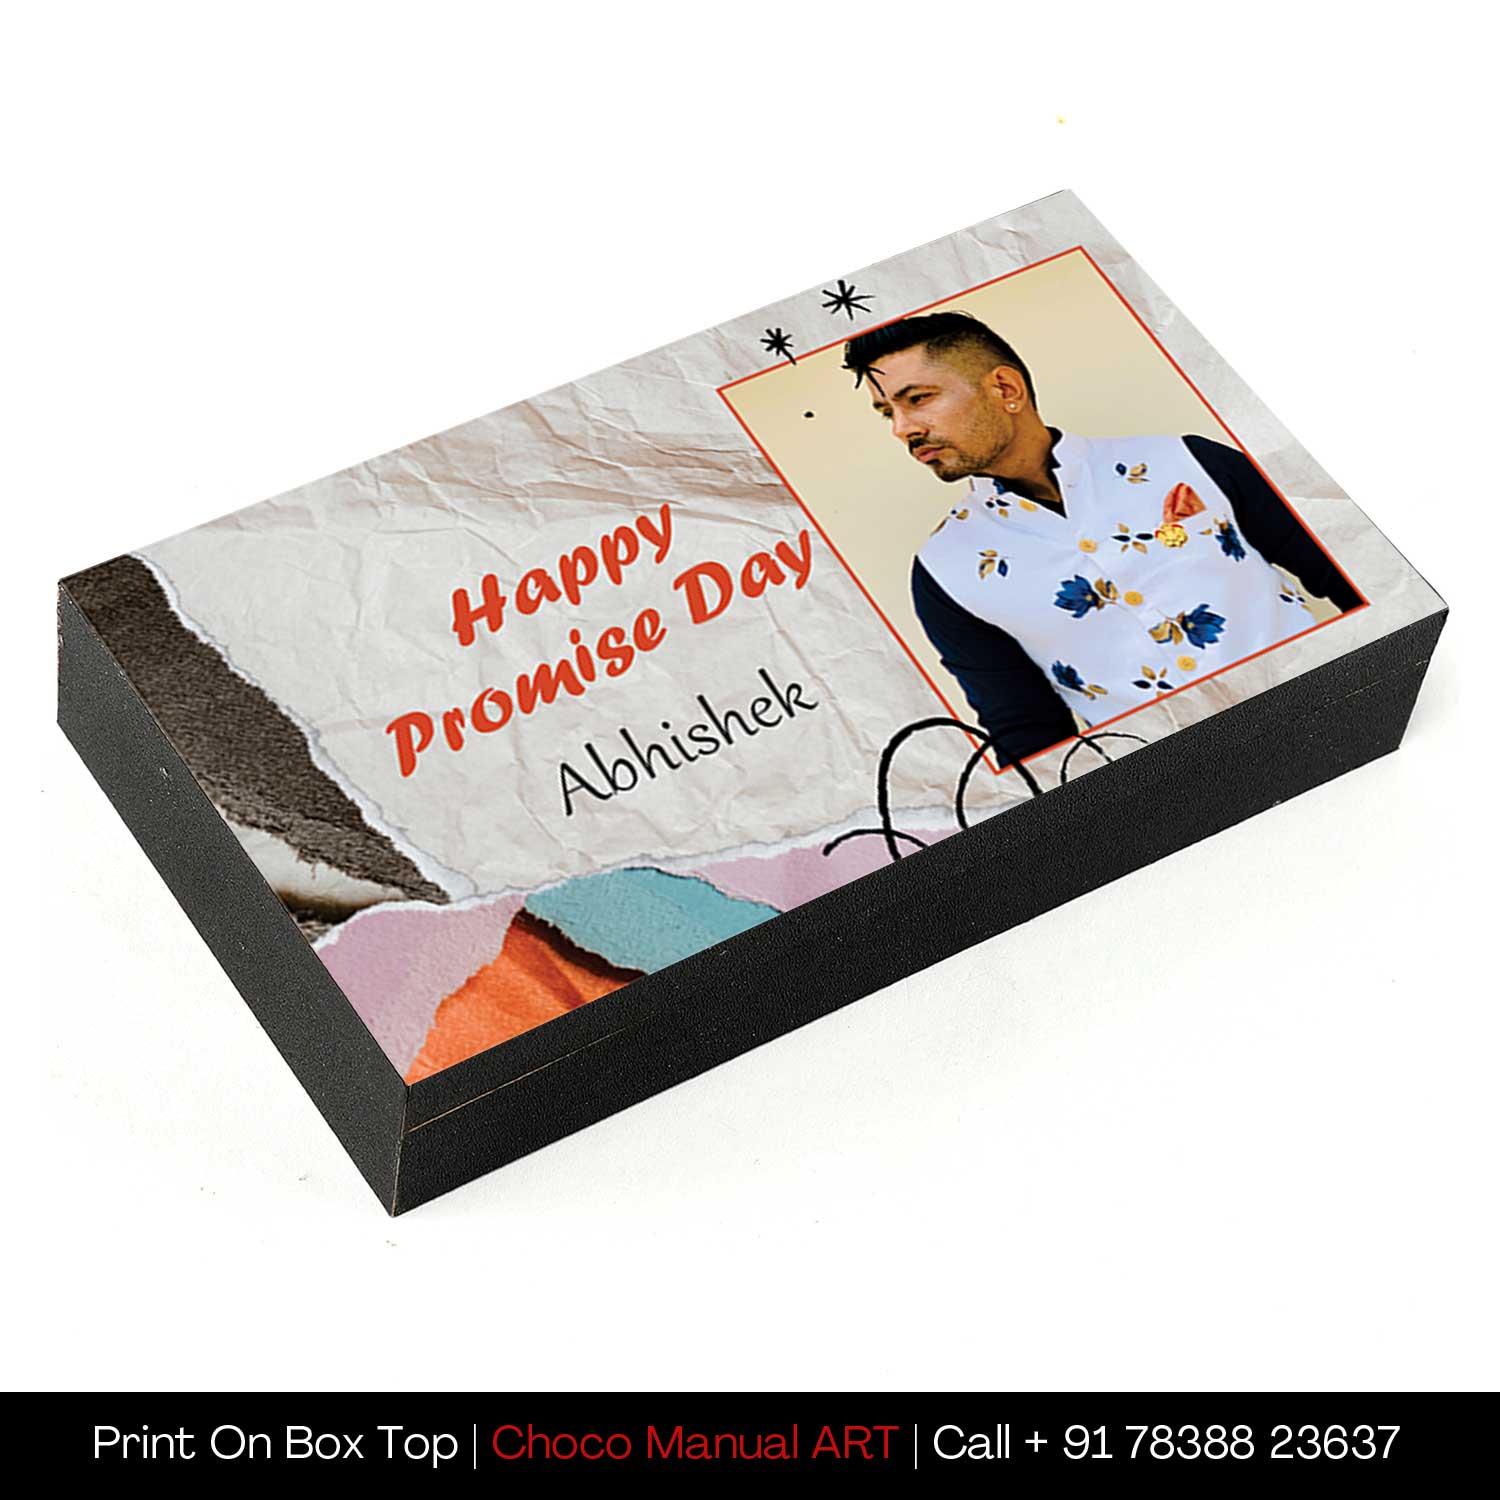 Best Promise Day image/name printed gift for friend